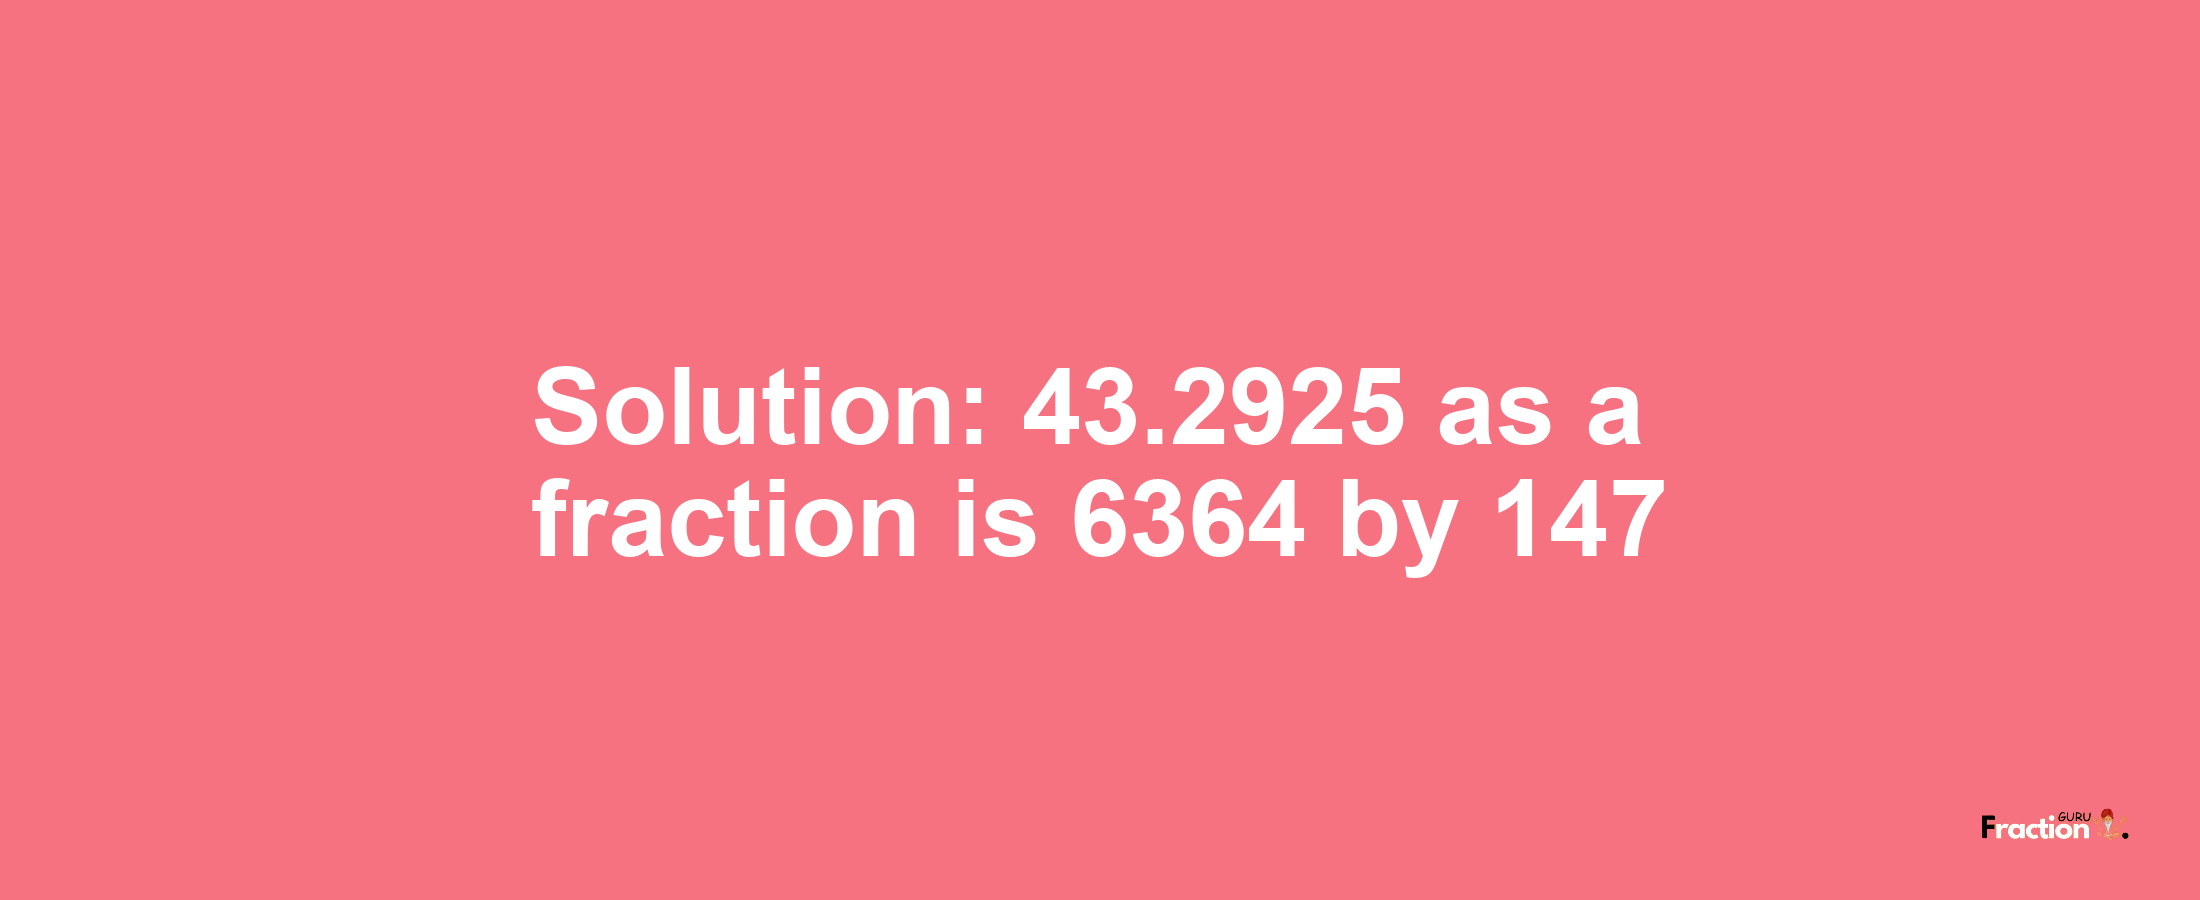 Solution:43.2925 as a fraction is 6364/147